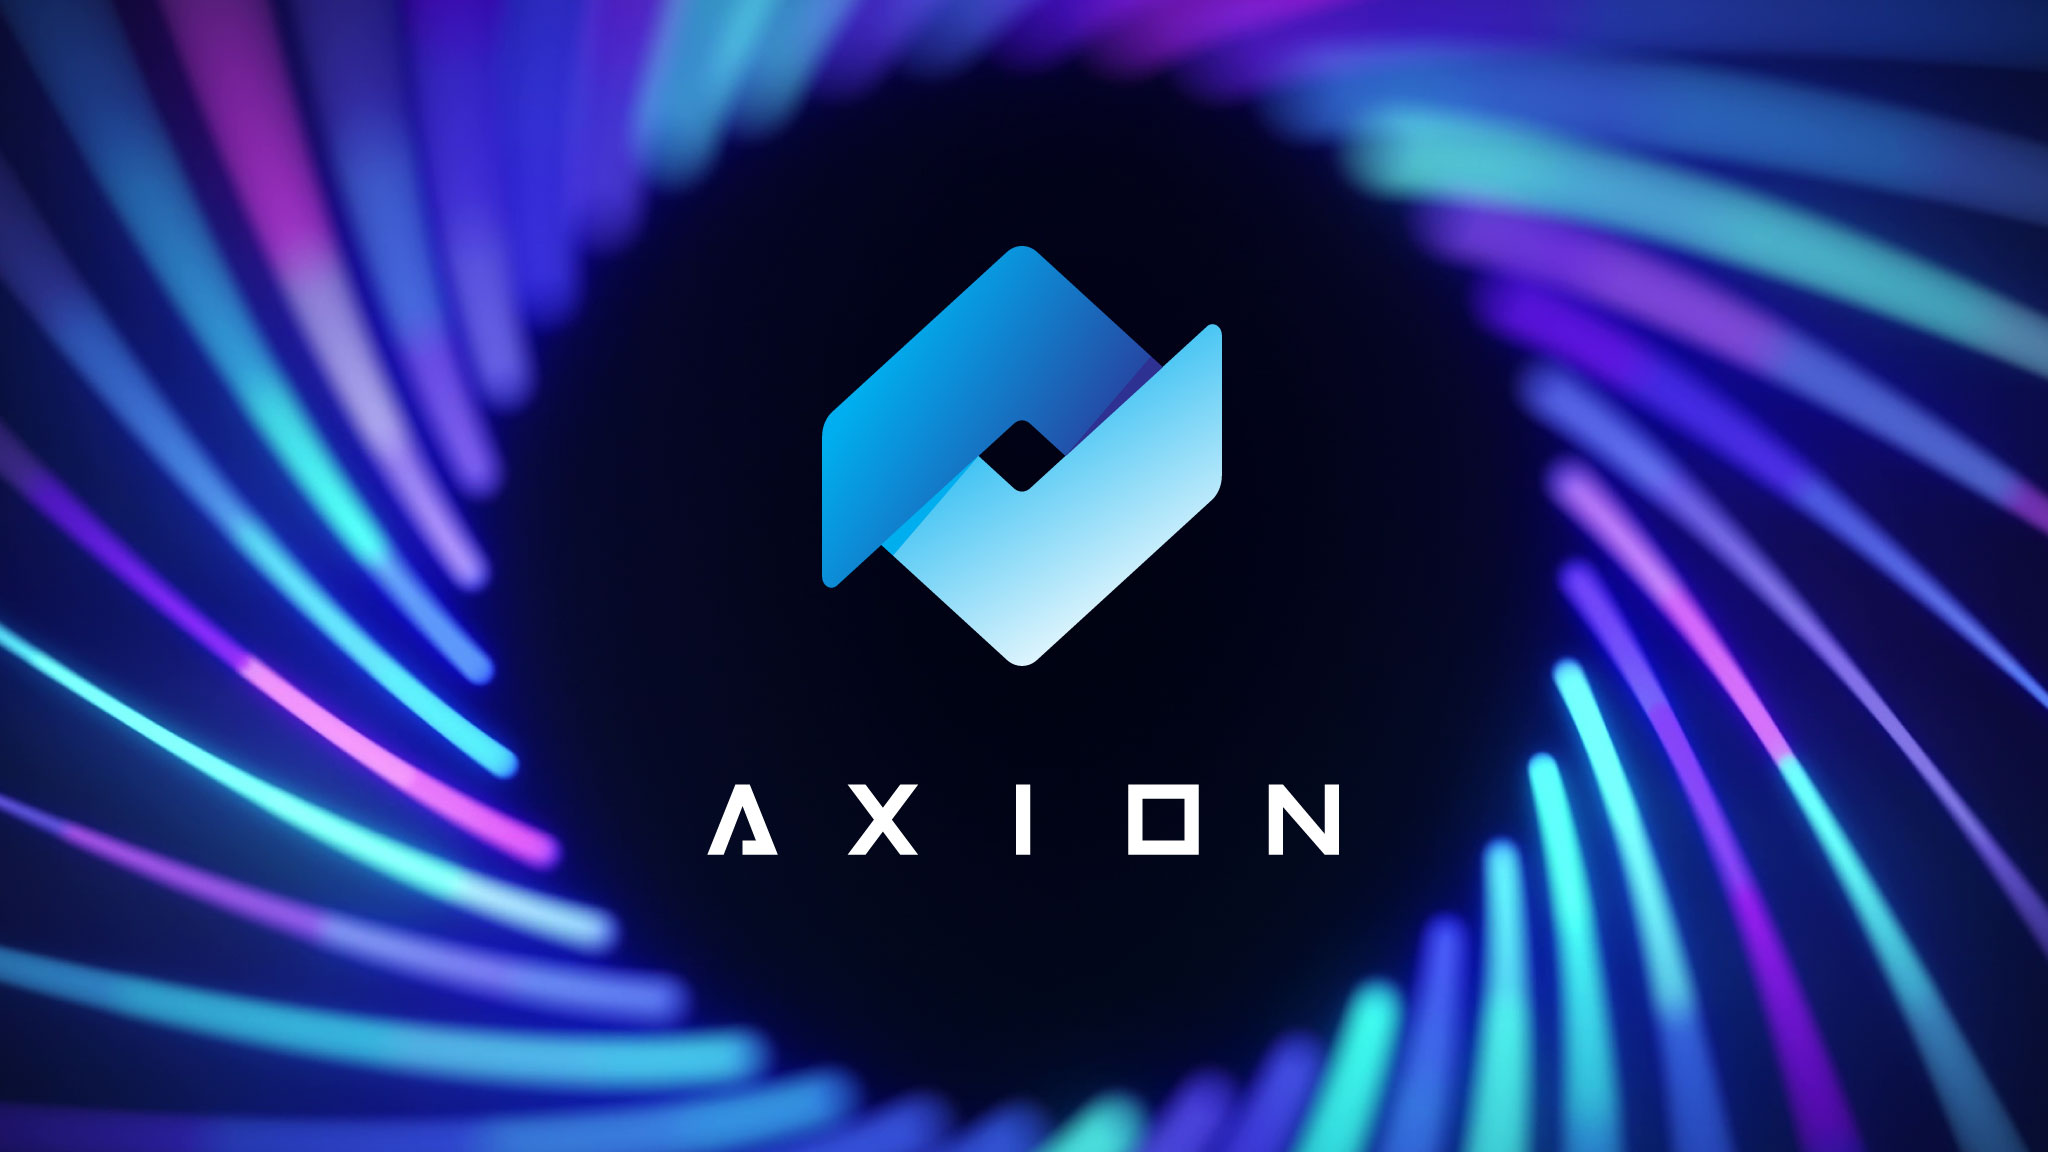 Axion Completes Migration to Polygon, Finished NFT Stakes, and More